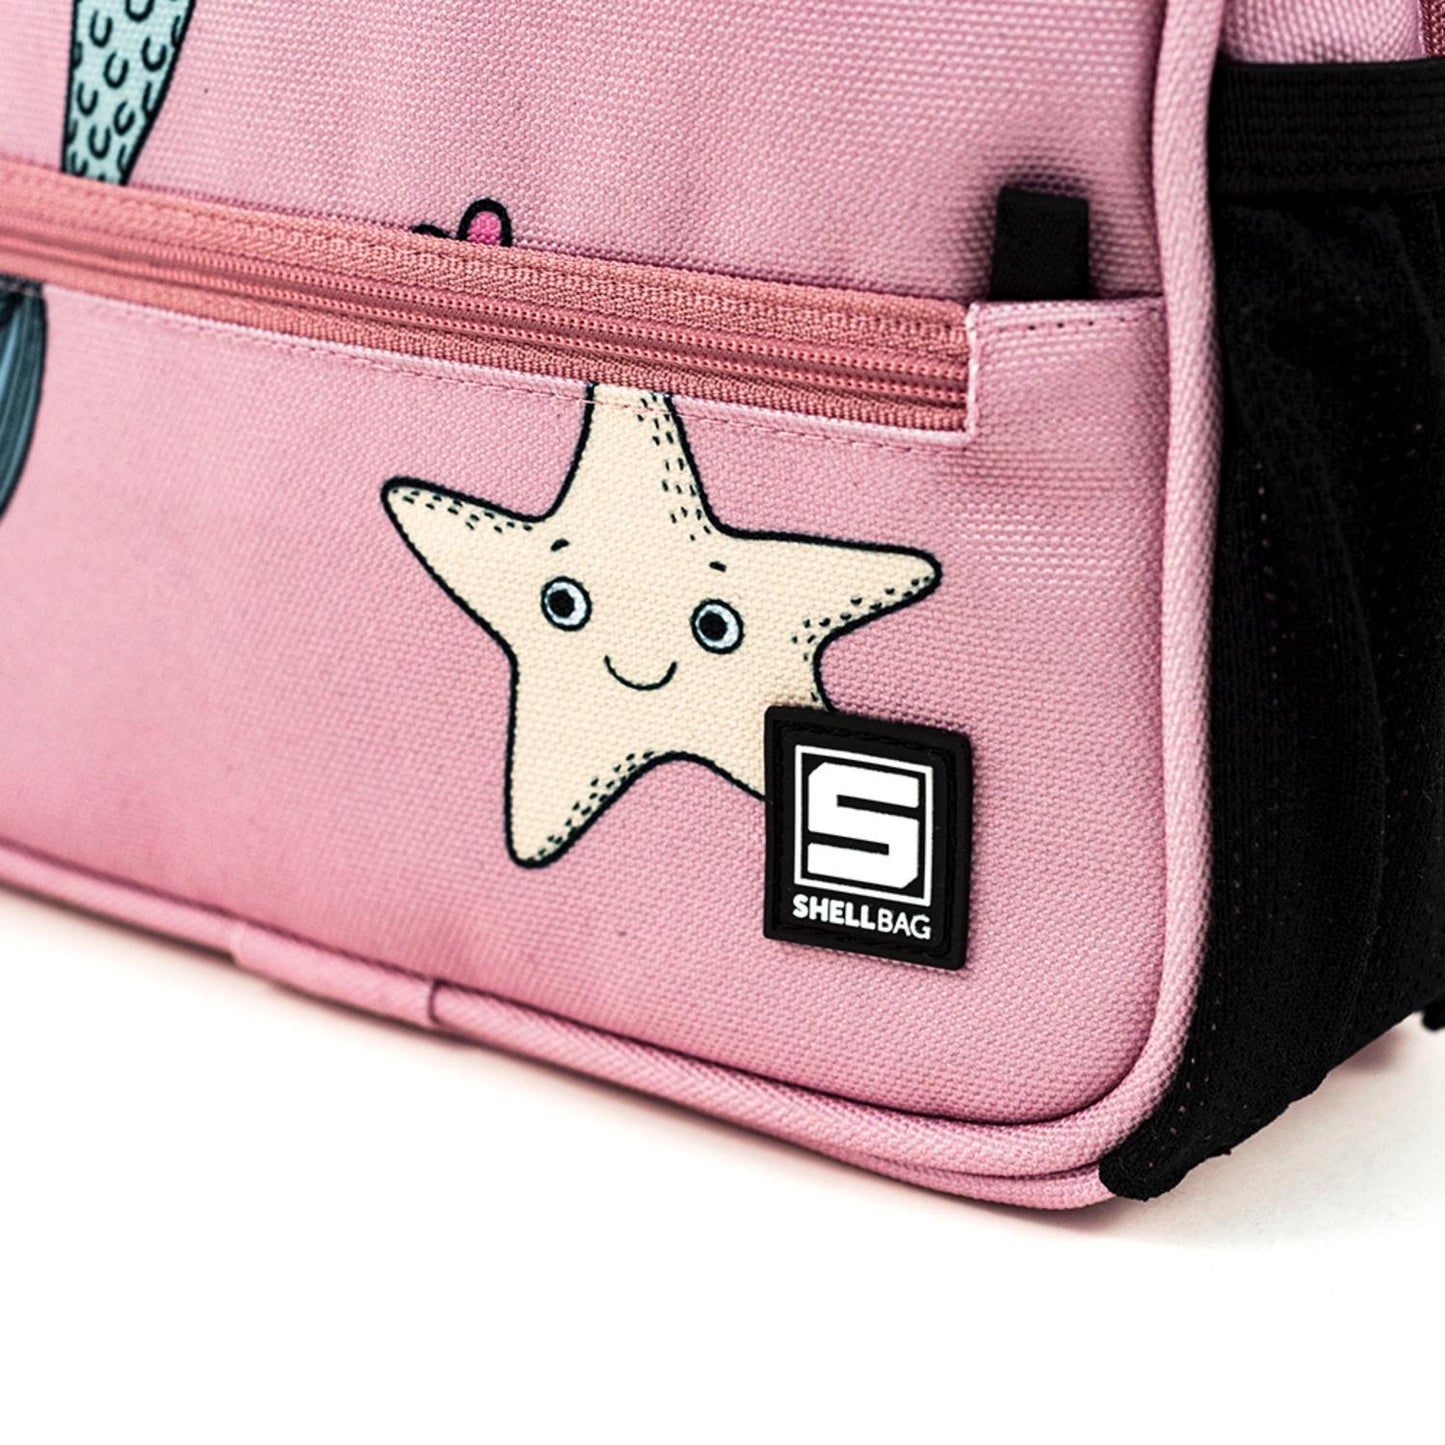 Shellbag Little Mermaid Mini Backpack | Kid’s Backpack for Creche, Nursery & School | Closeup - Zip-up Front Pocket with Logo | BeoVERDE.ie